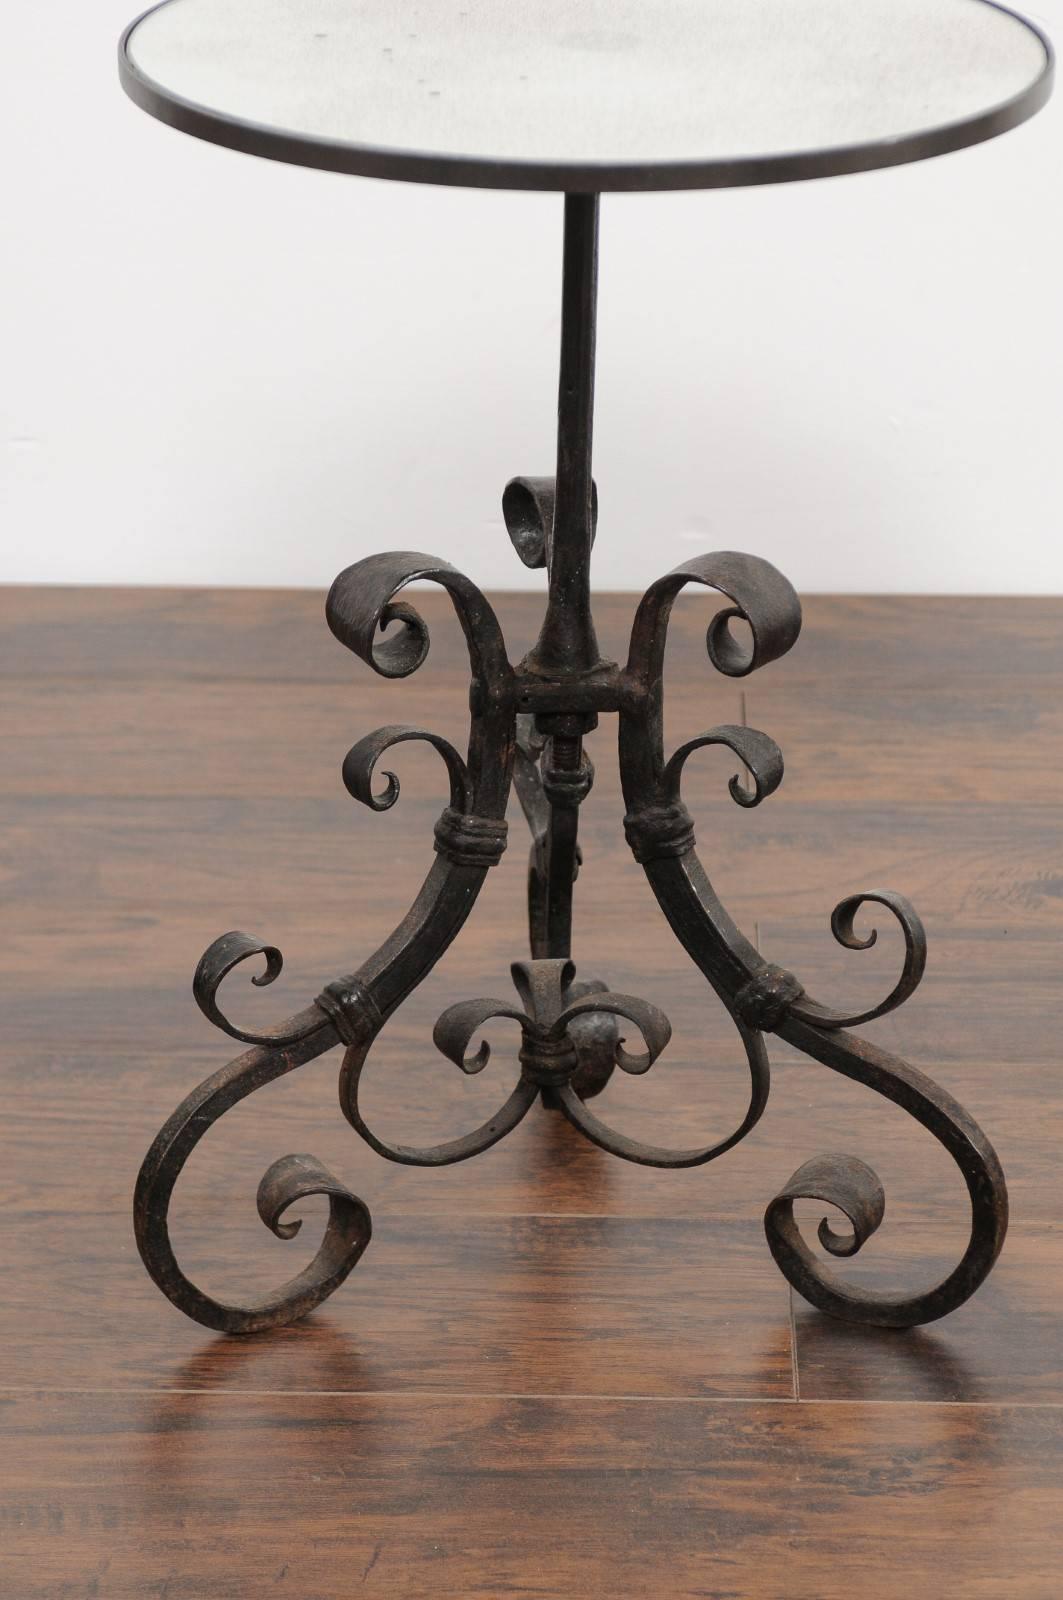 1870s Italian Wrought-Iron Pedestal Side Table with Mirrored Top and Scrolls 1